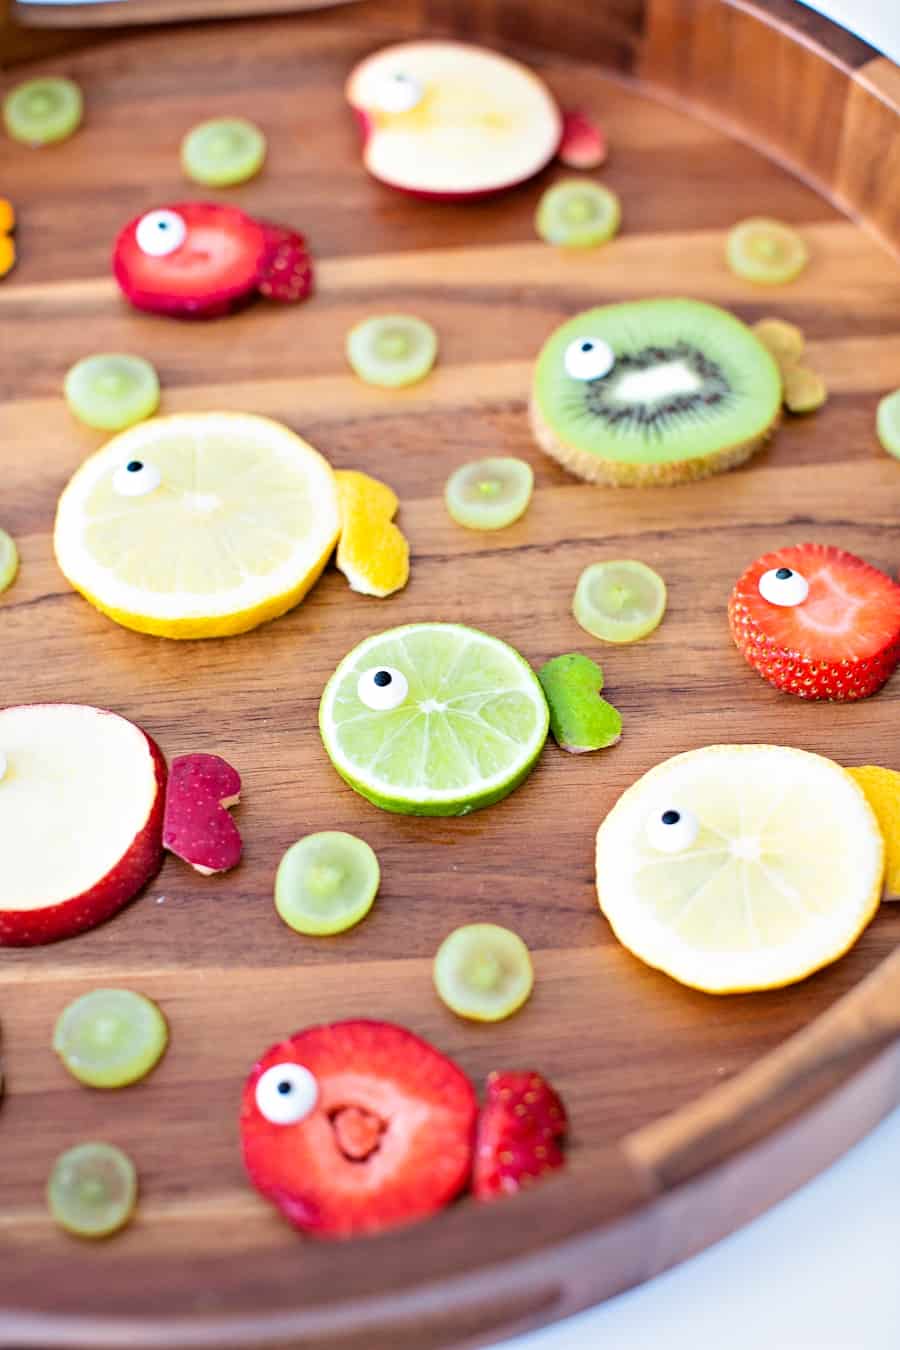 oranges, limes, kiwi and apples cut to resemble fish fruit for a kid snack 